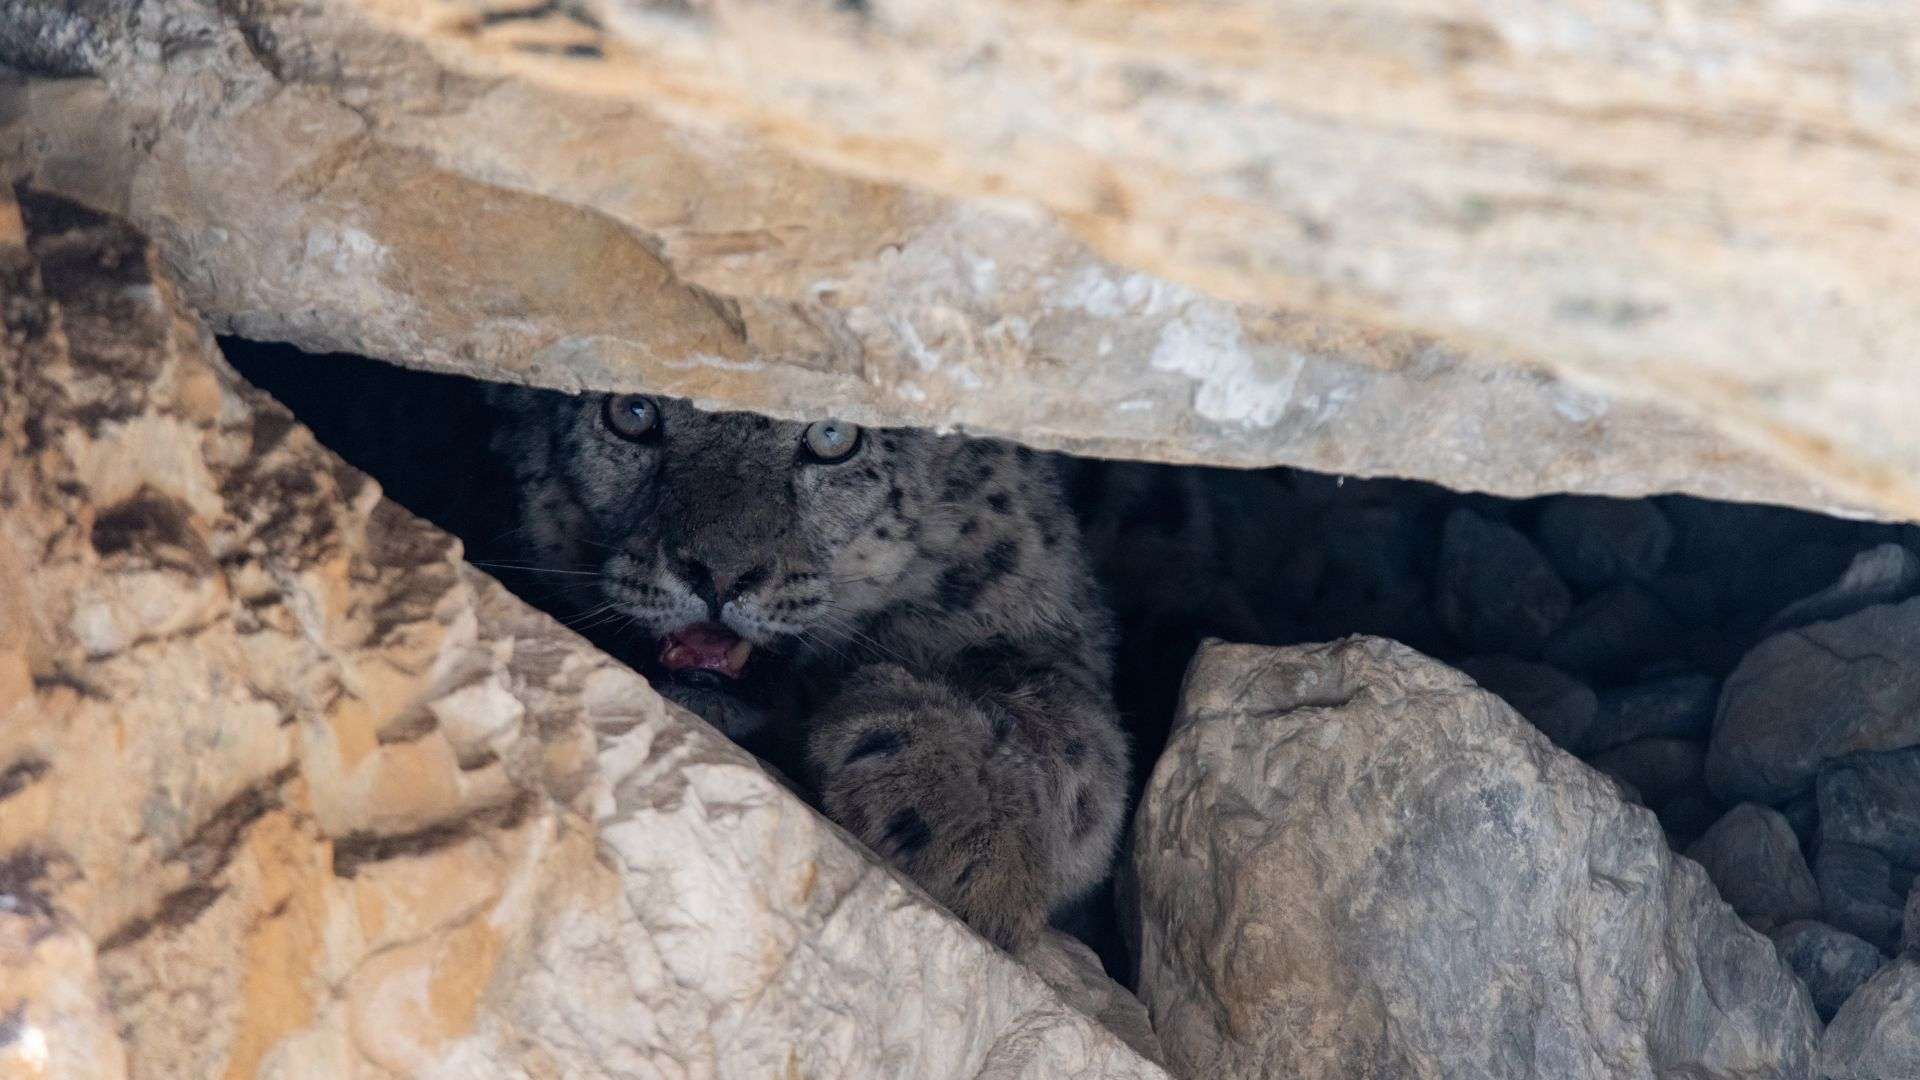 Two snow leopards were successfully collared in Shey Phoksundo National Park, Western Nepal. The first snow leopard was collared on May 19, 2021 in the Rapka area of Saldang. The enigmatic 7-year-old male cat weighed 37 kgs. The second snow leopard was collared in Dhora area of Saldang on May 25, 2021. This 6-year-old male adult snow leopard weighed 38 kgs. Both cats will be closely monitored by the national park and conservation biologists over the next 18 months. The GPS collar connected to the snow leopards periodically transmits the location of the animal providing invaluable information on the animal’s habitat, their spatial behavior, as well as transboundary movement patterns, contributing towards conservation planning for the species through habitat management, conflict mitigation or otherwise.